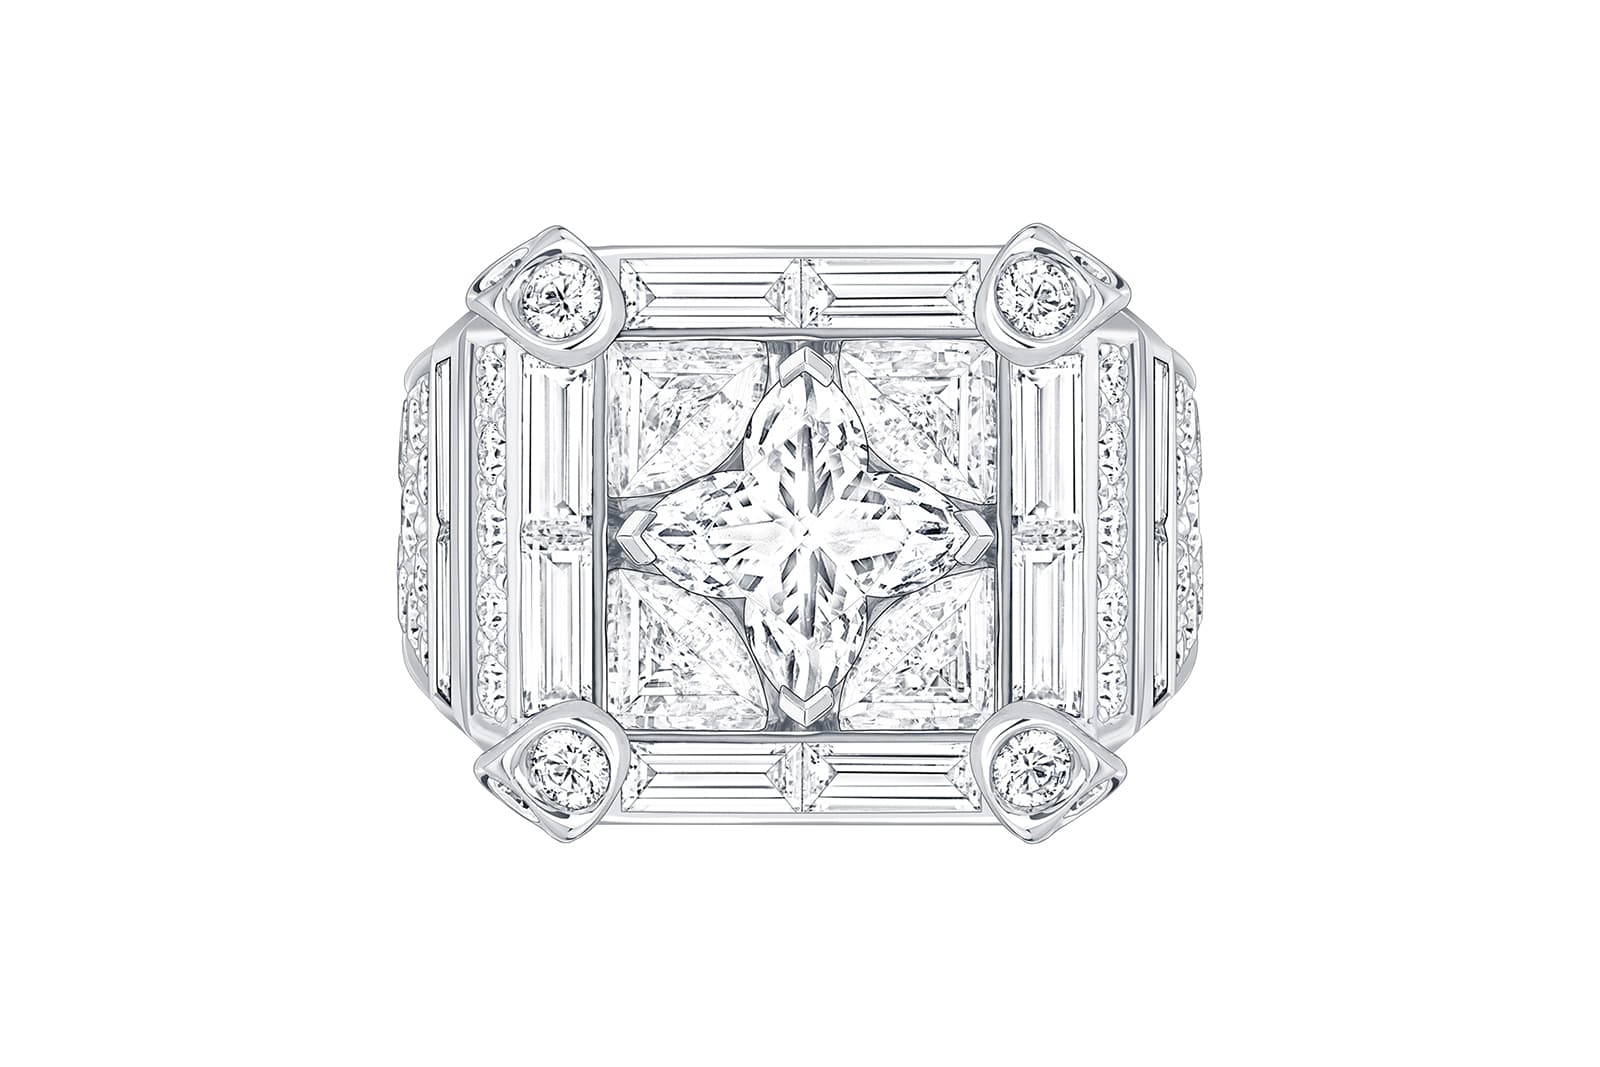 Louis Vuitton diamond and white gold Mini Malle ring from the Bravery II High Jewellery collection